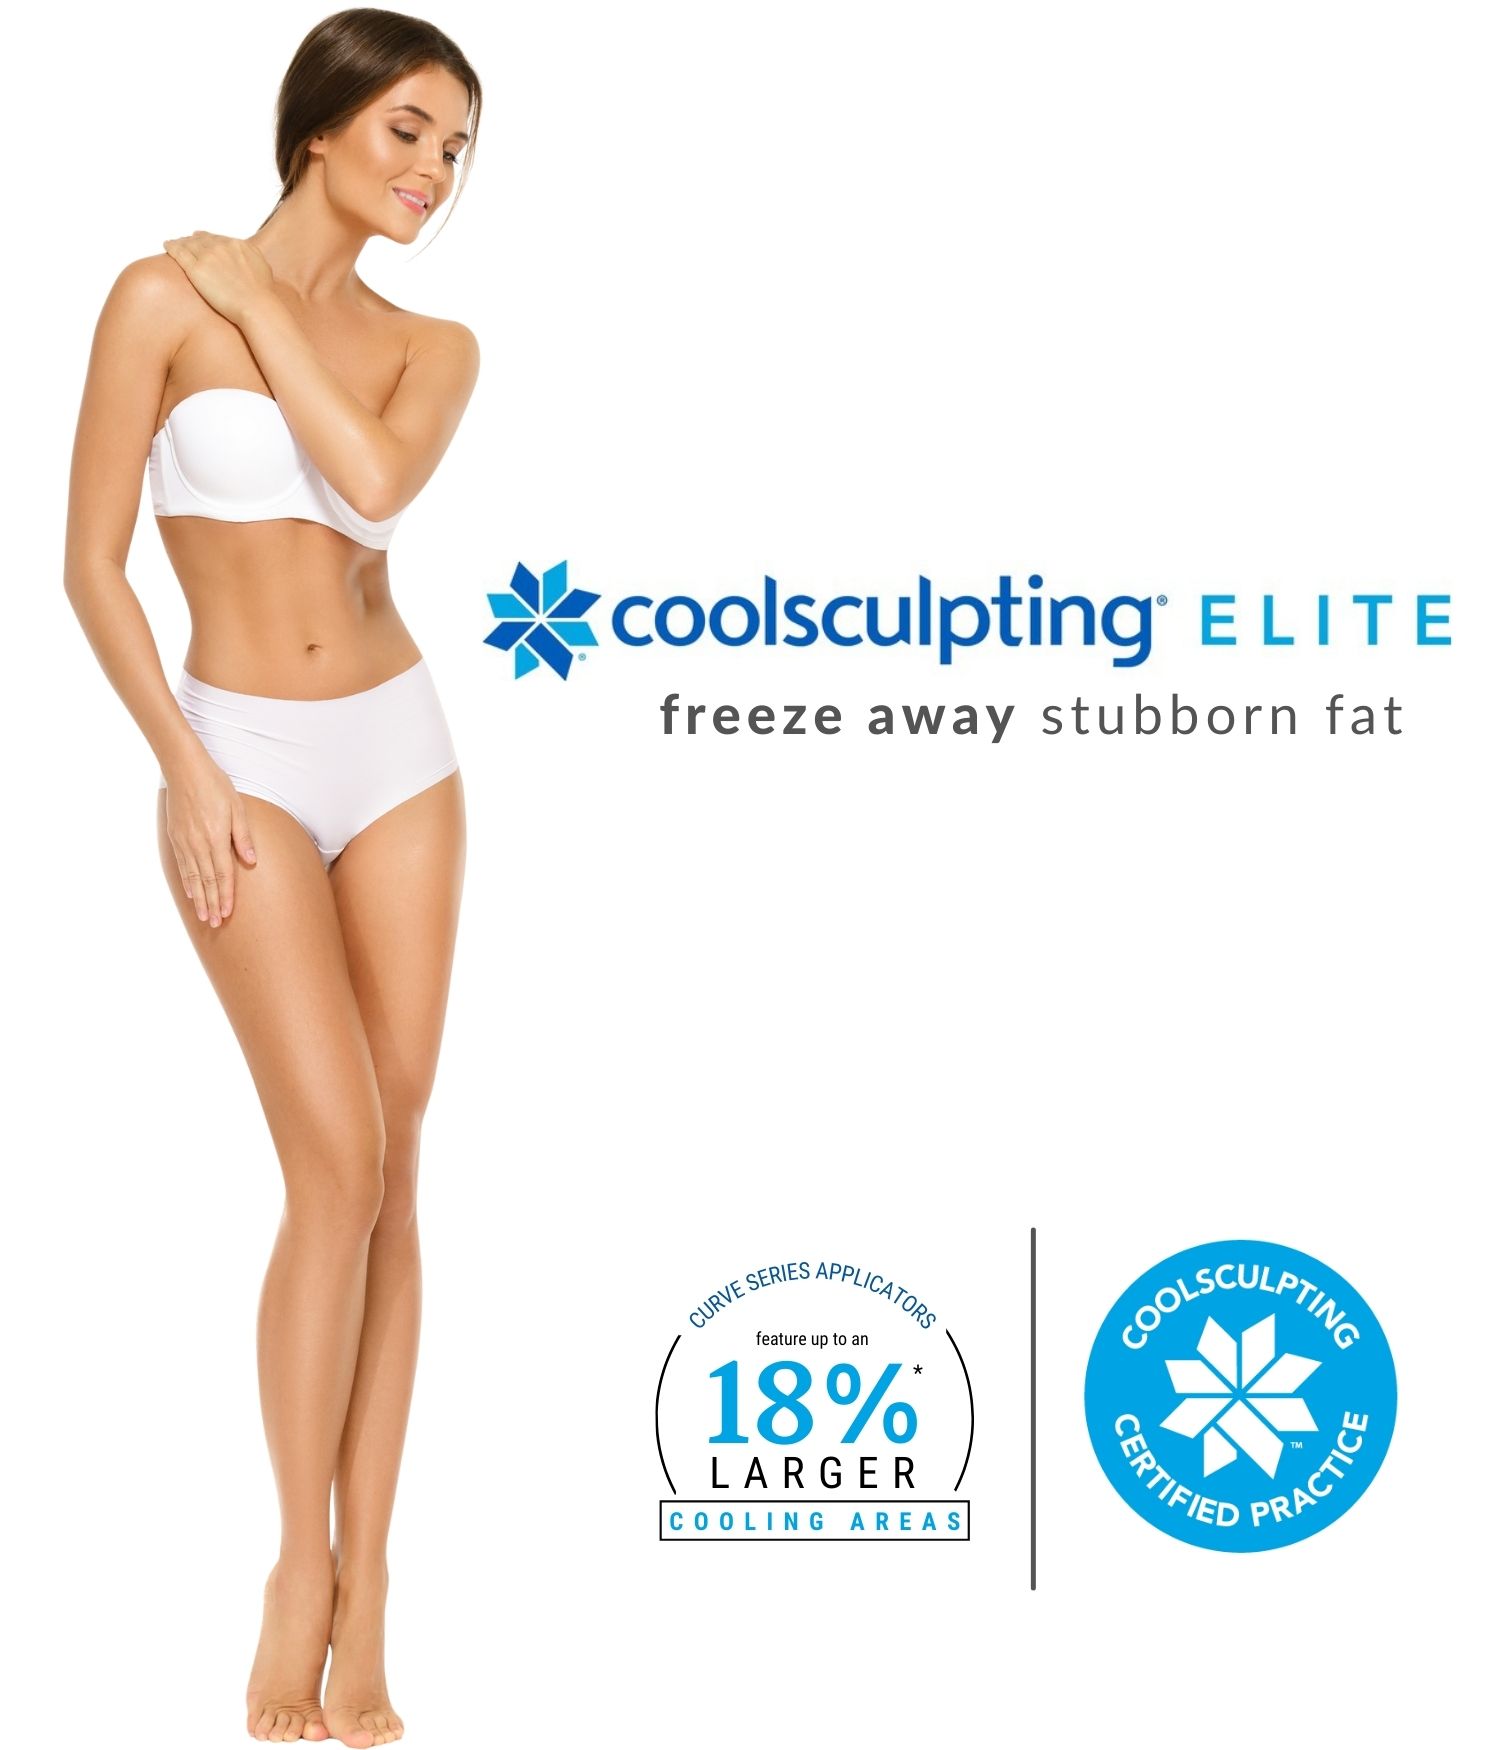 transformation aesthetic solutions, plastic surgery center, medical spa, Body Sculpting, Body Contouring, CoolSculpting, Remove Fat